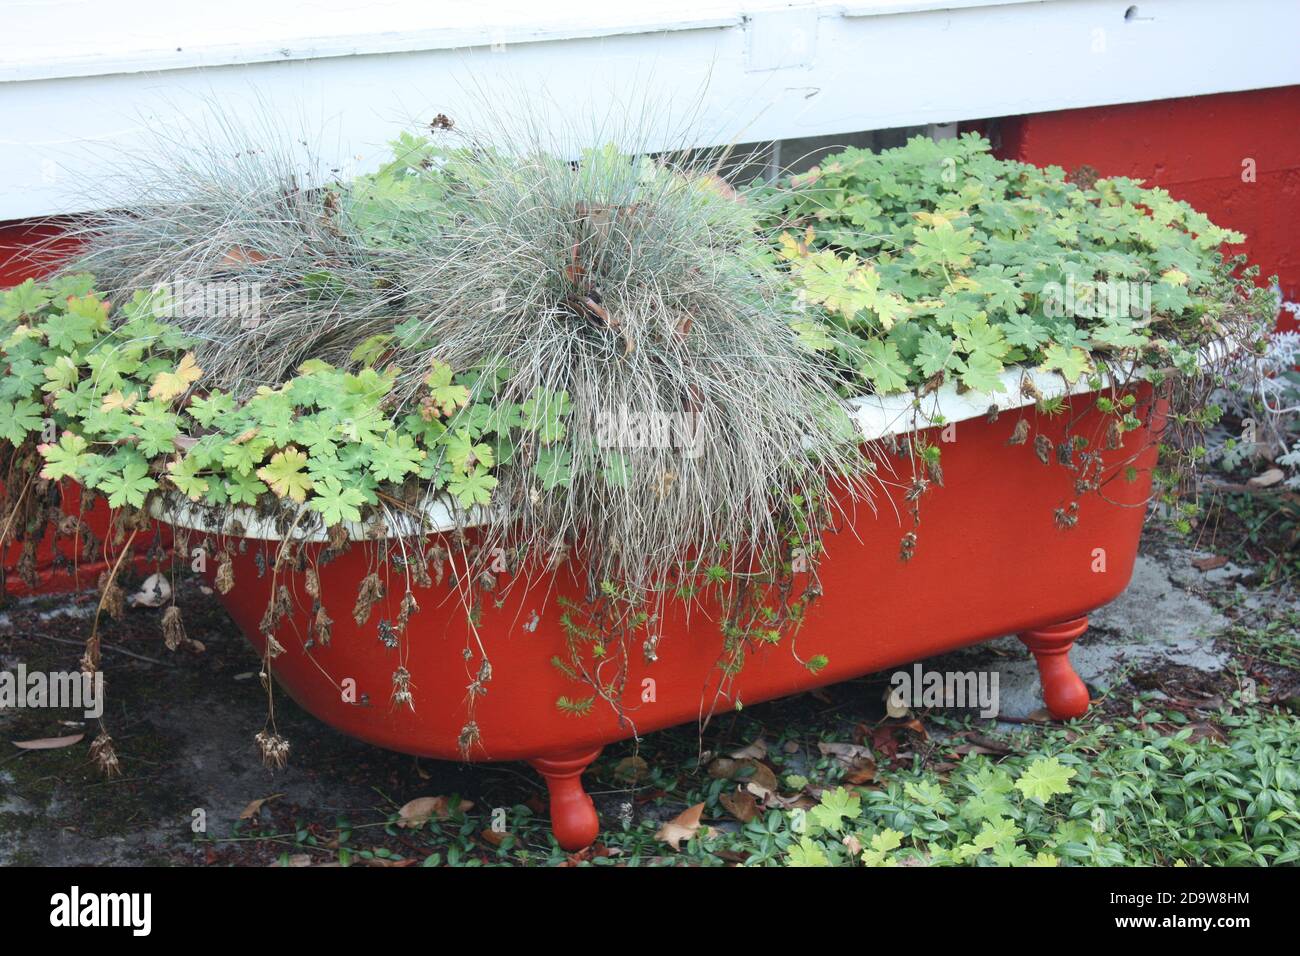 An old bath used as a planting tray outside the Protection Island Museum in Gallows Point Light Park near Nanaimo, British Columbia Stock Photo